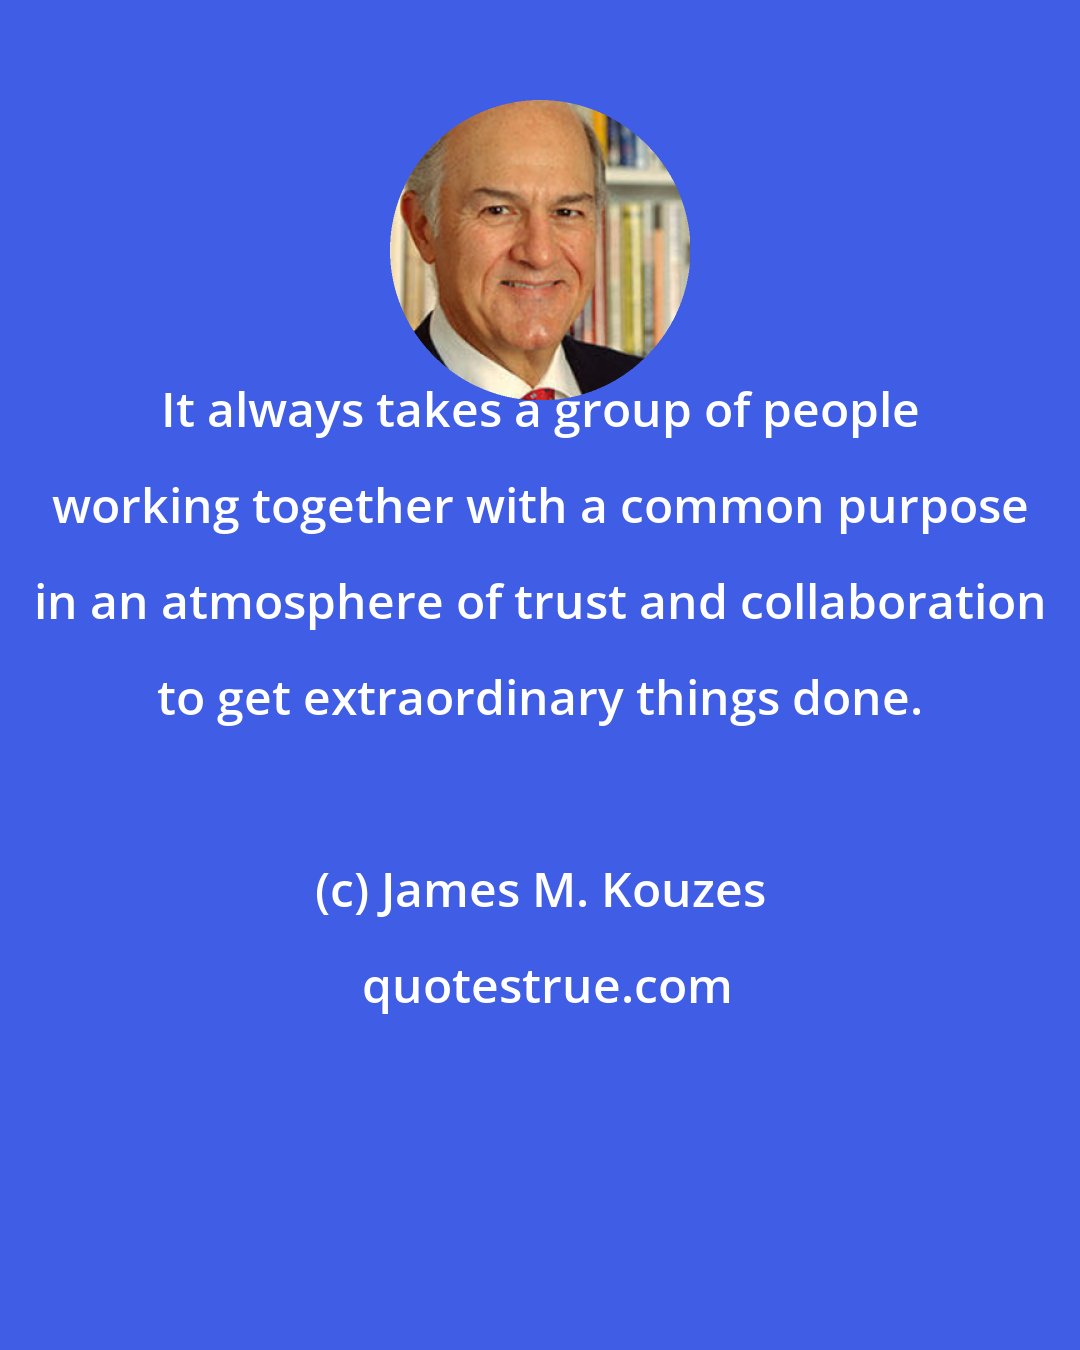 James M. Kouzes: It always takes a group of people working together with a common purpose in an atmosphere of trust and collaboration to get extraordinary things done.